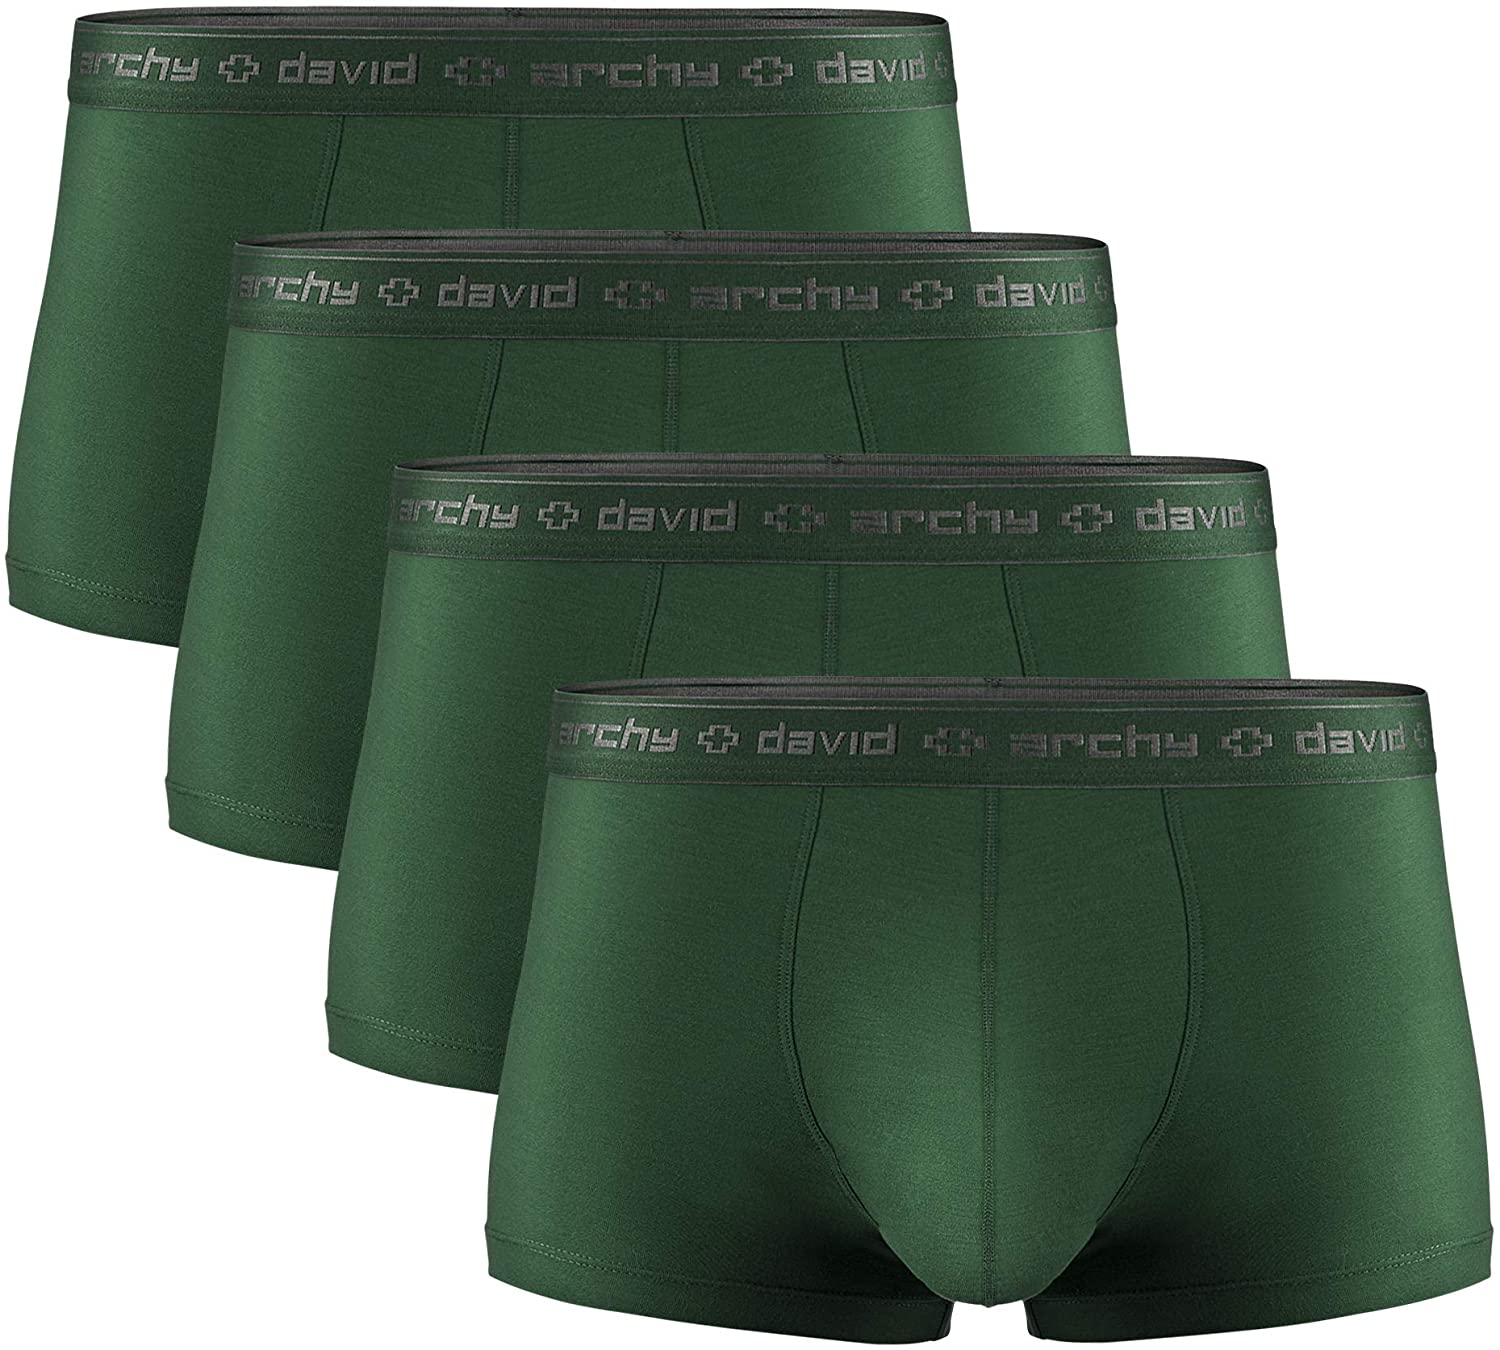 Akiihool Men's Briefs Men's Dual Pouch Underwear Micro Modal Trunks  Separate Pouches with Fly (Green,M) 